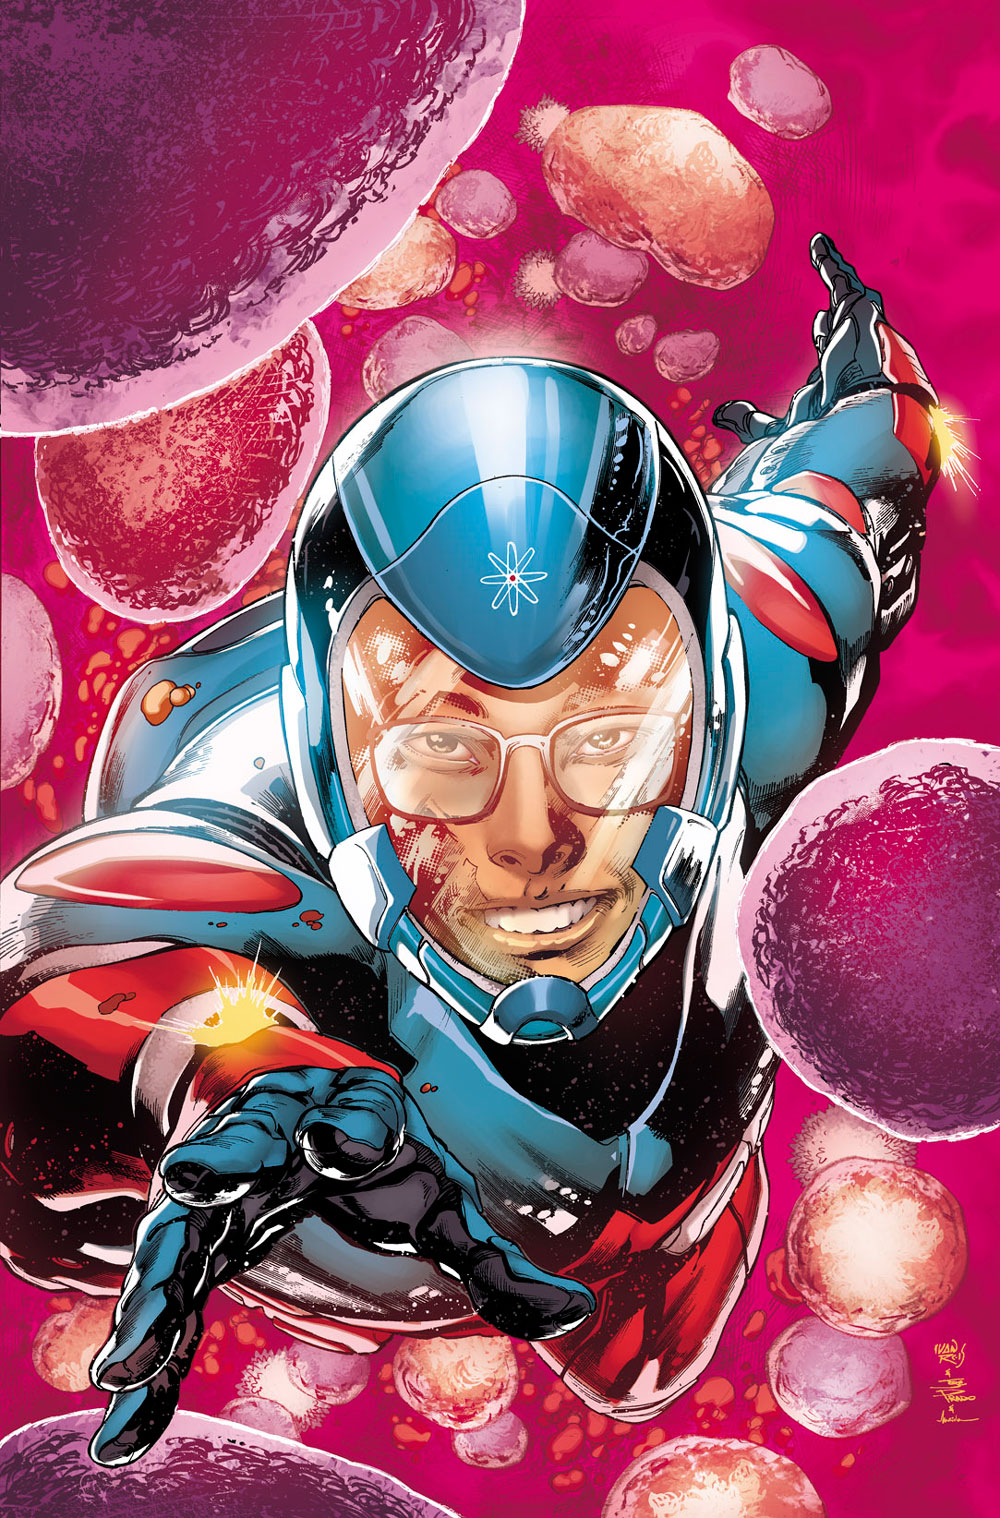 JUSTICE LEAGUE OF AMERICA: THE ATOM #1